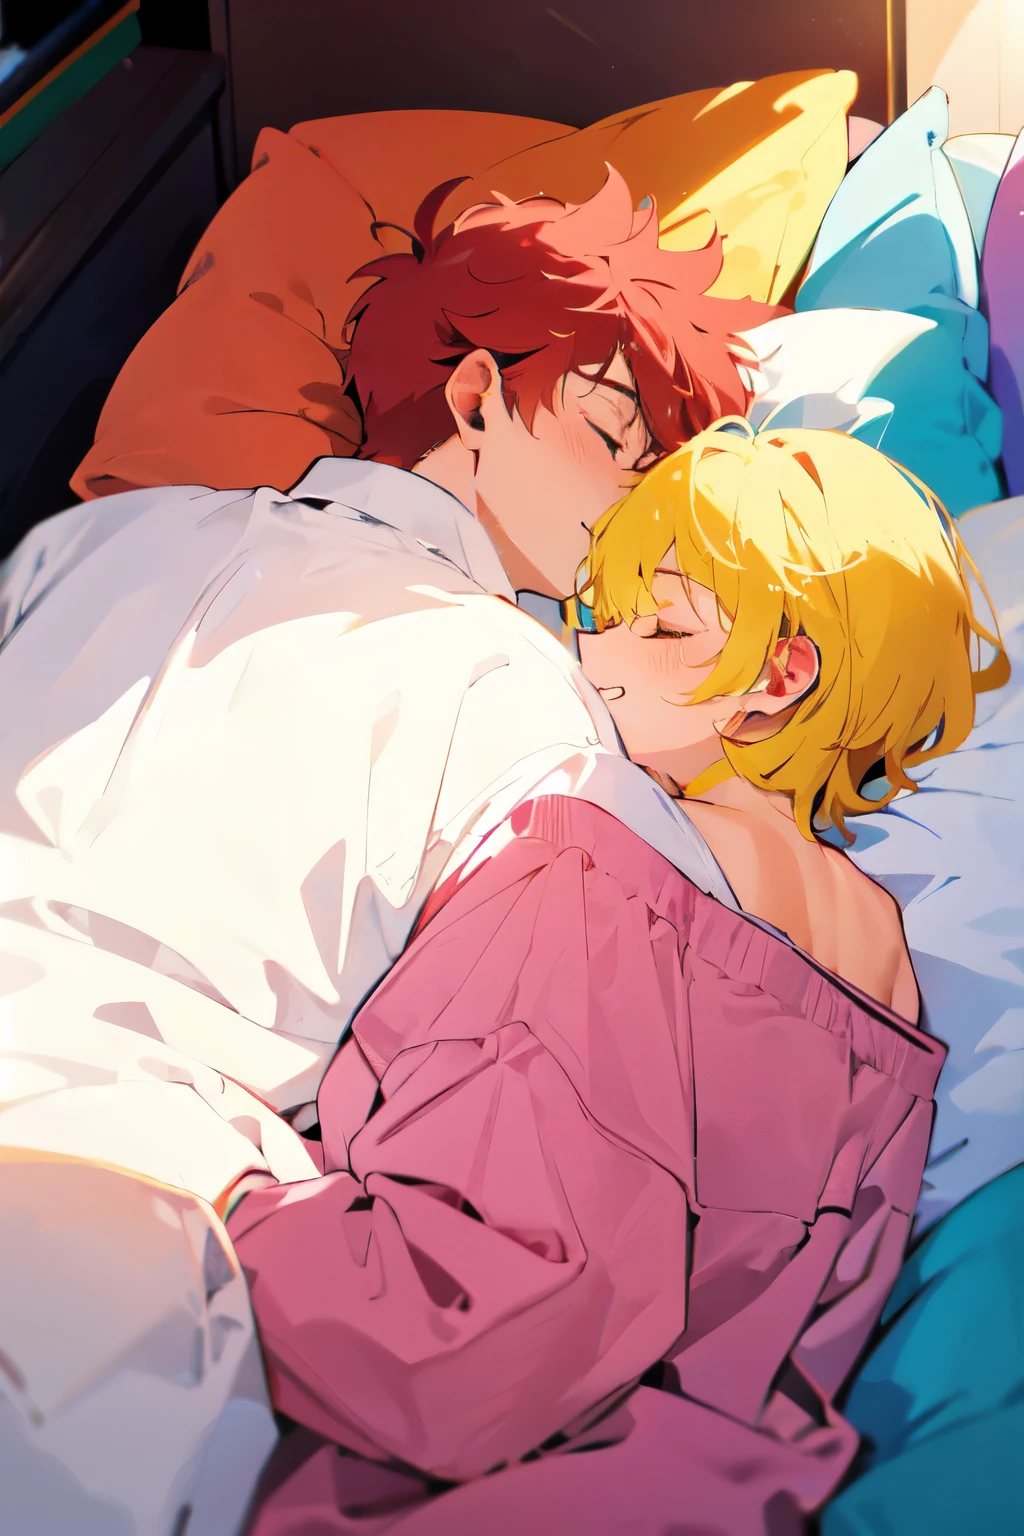 two gay men sleeping in bed, 2000's anime style, vibrant colors
